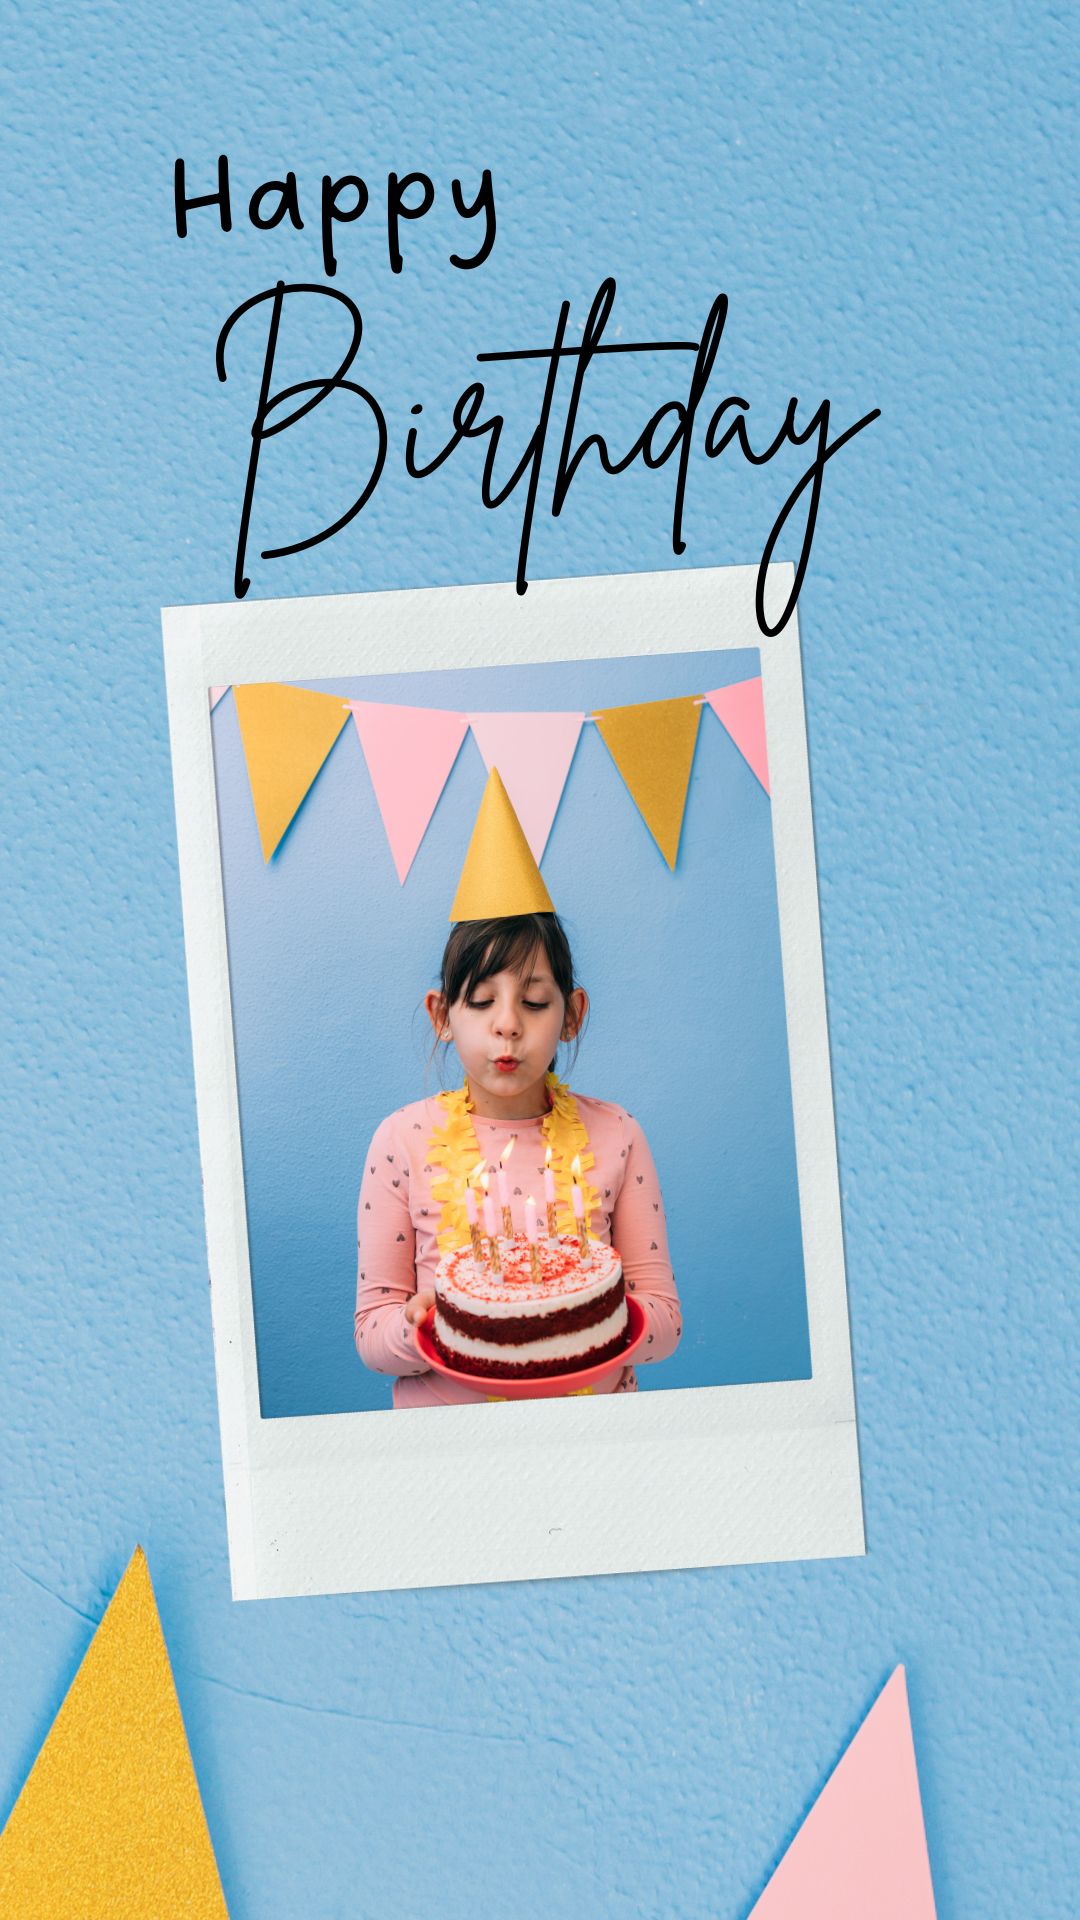 Blue simple happy birthday with photo frame